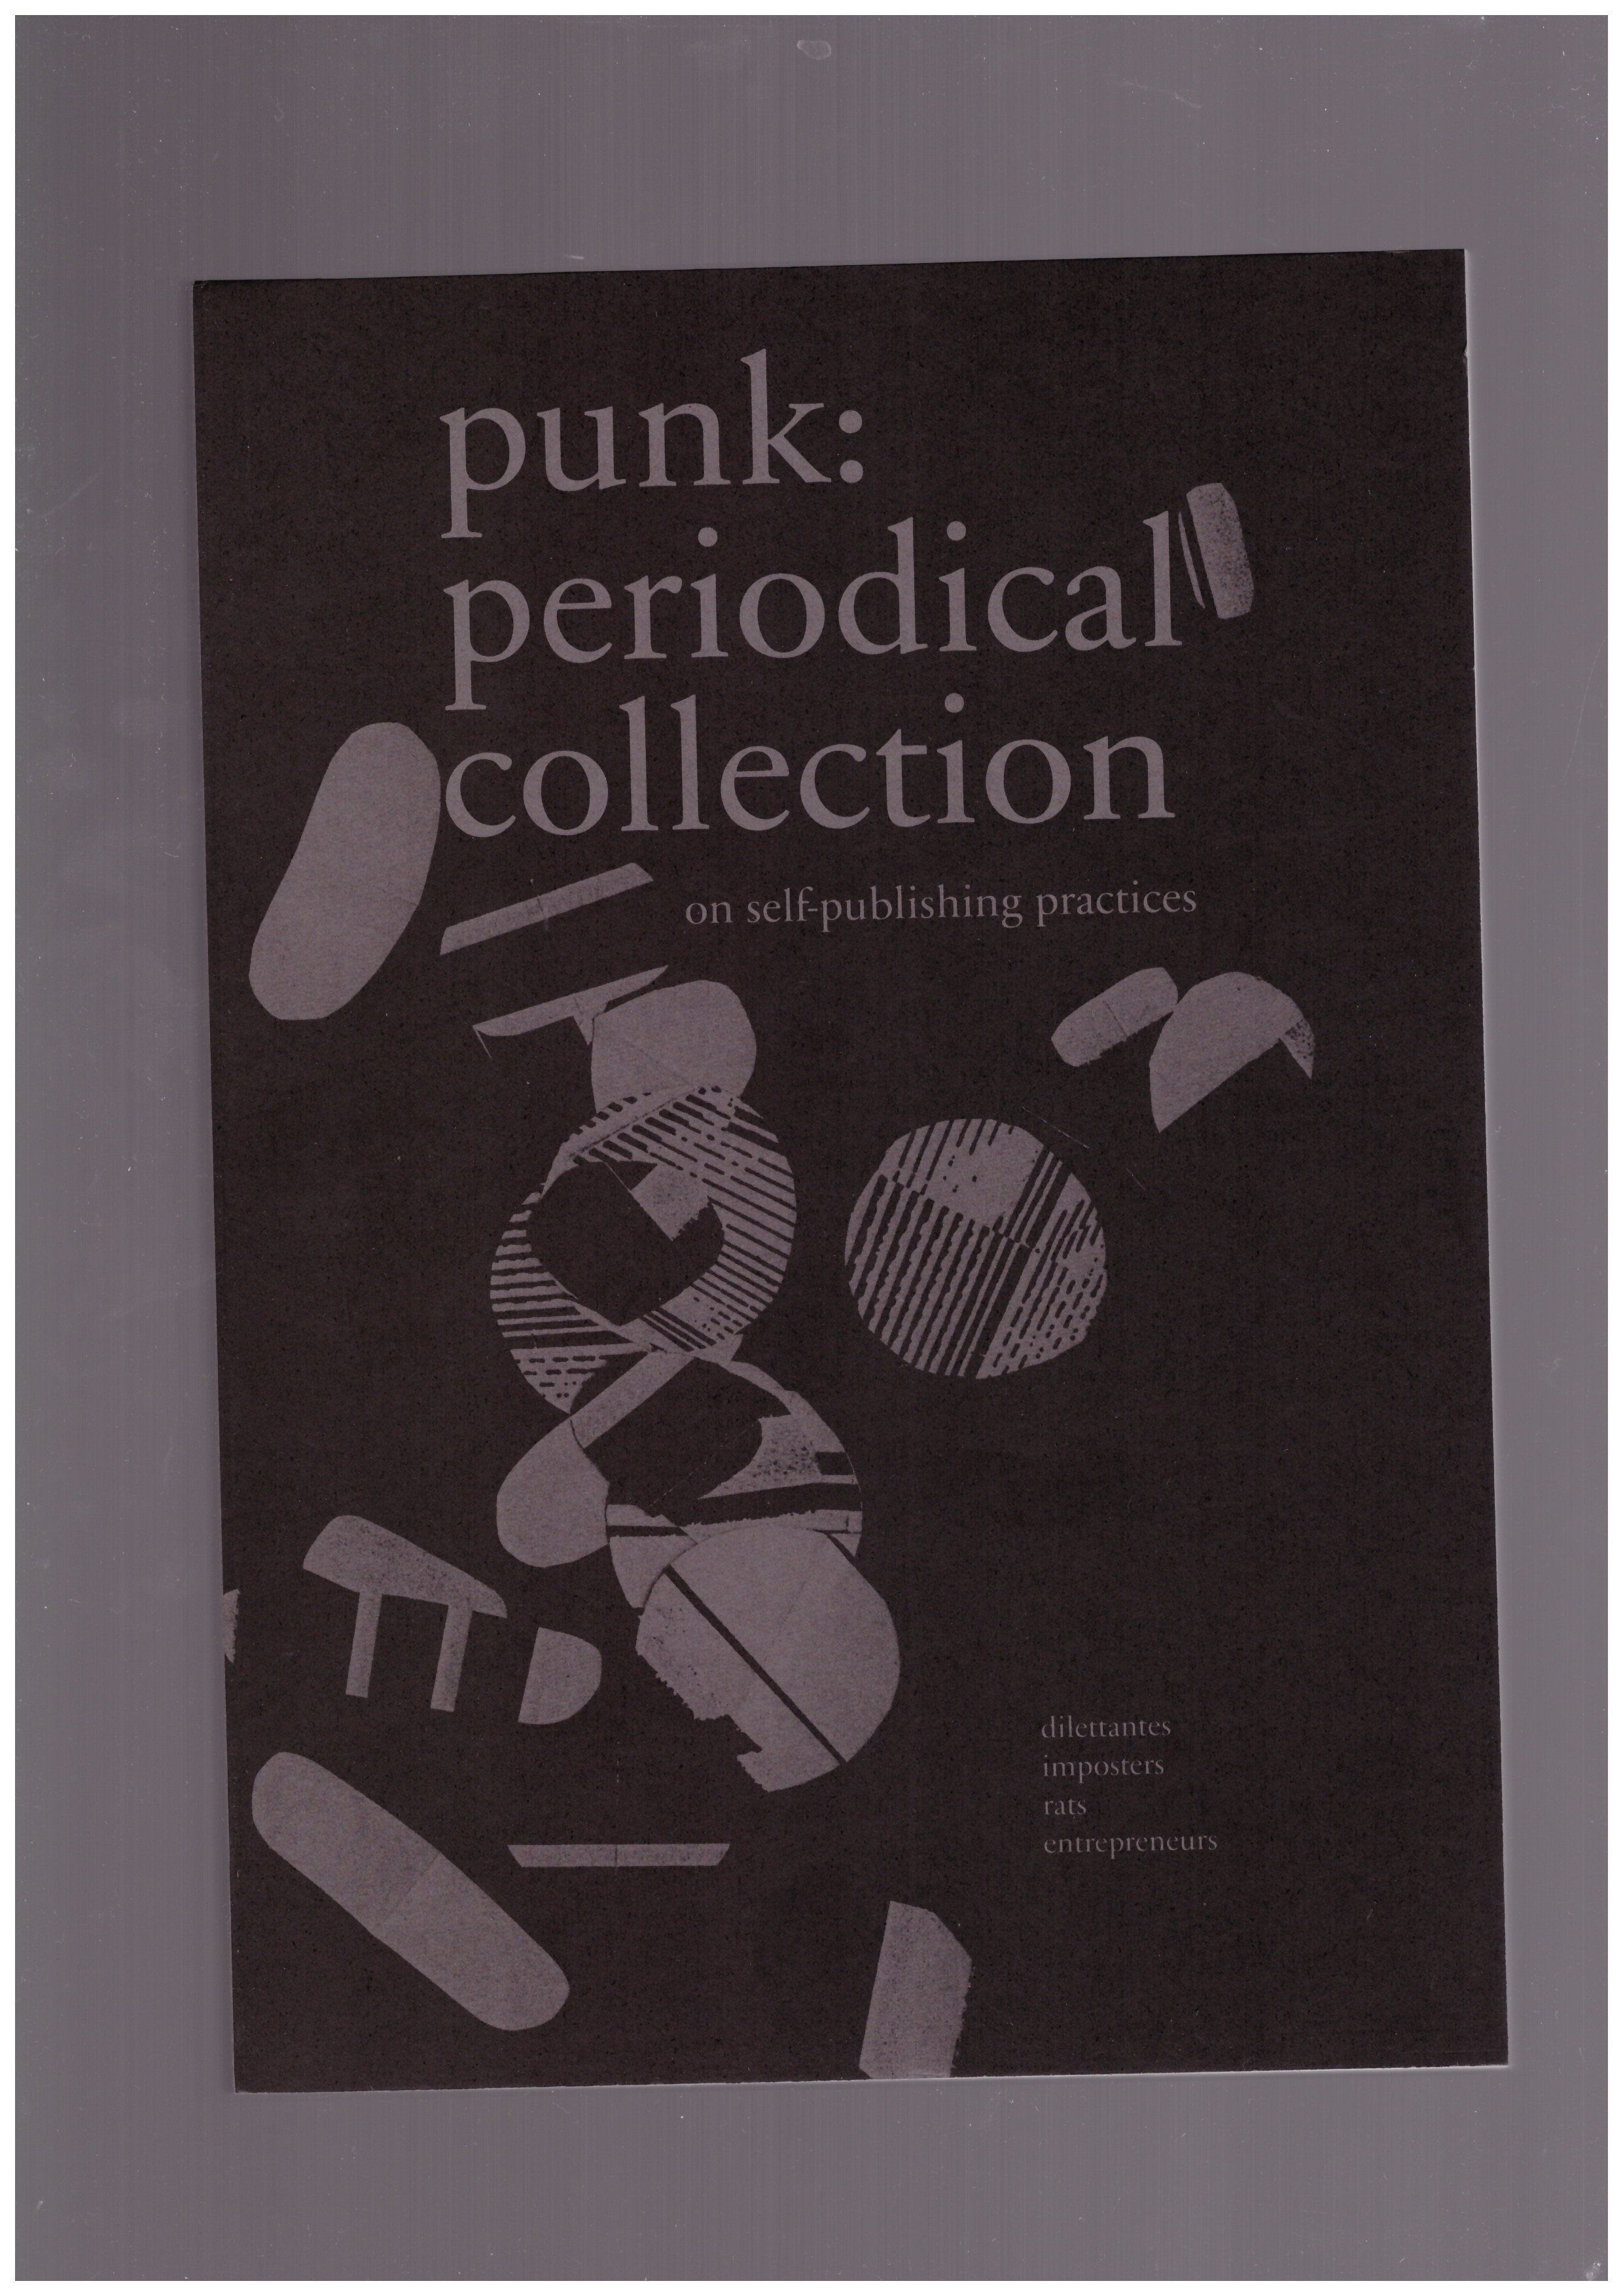 GANGLOFF, Paul - Punk: Periodical Collection